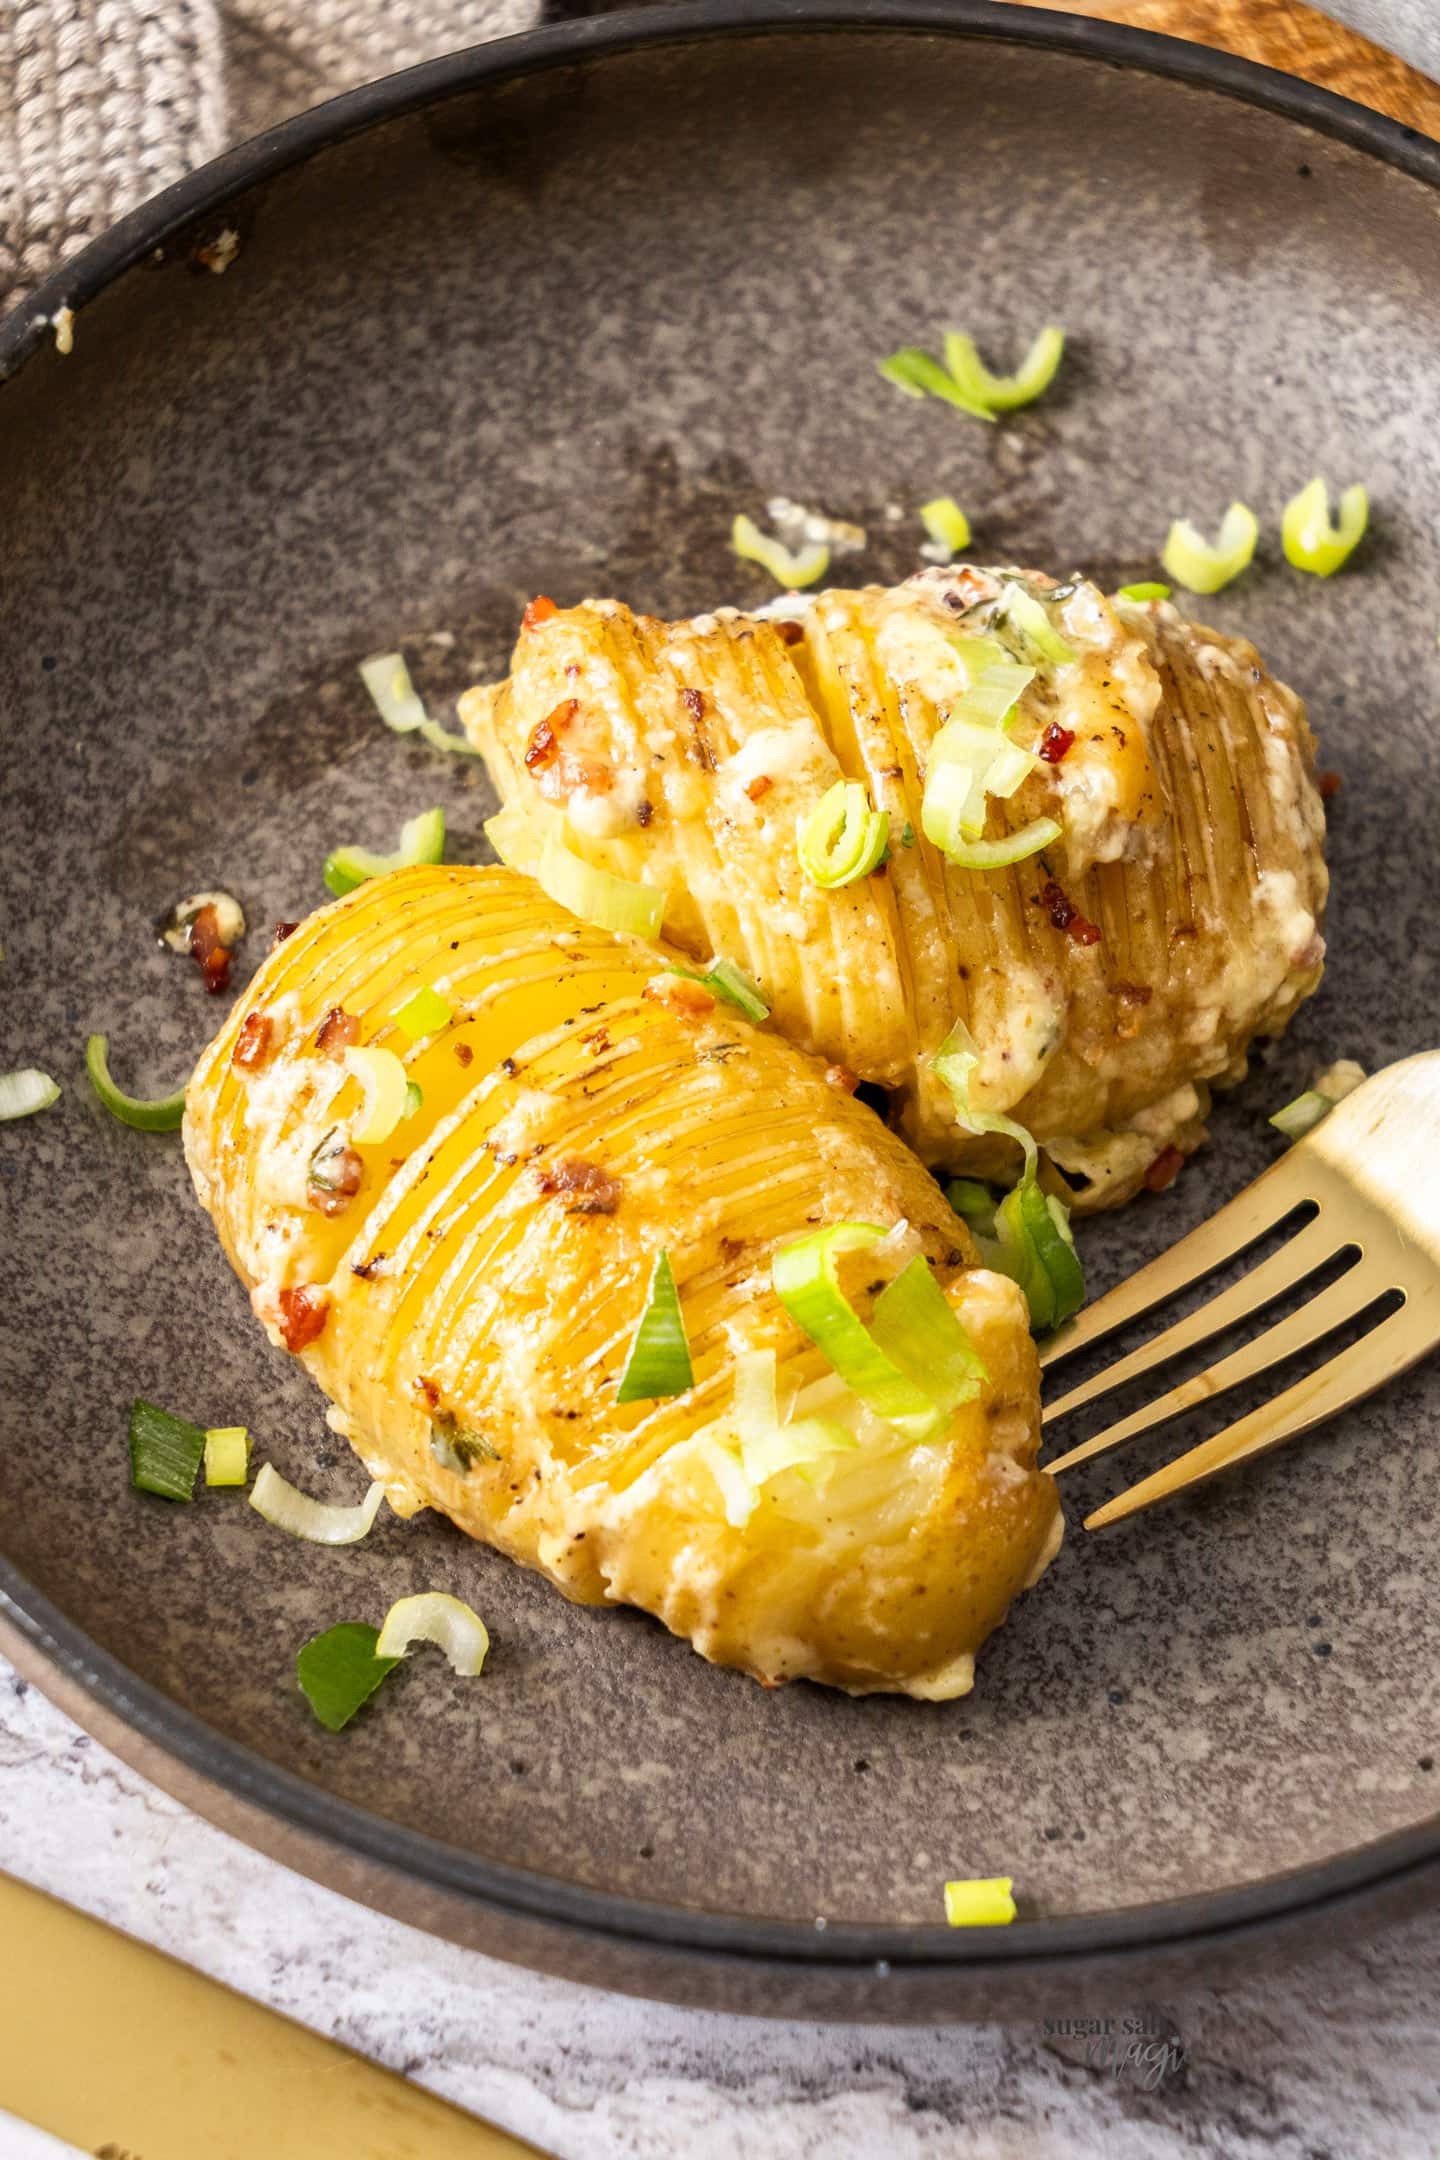 Two hasselback potatoes on a plate.